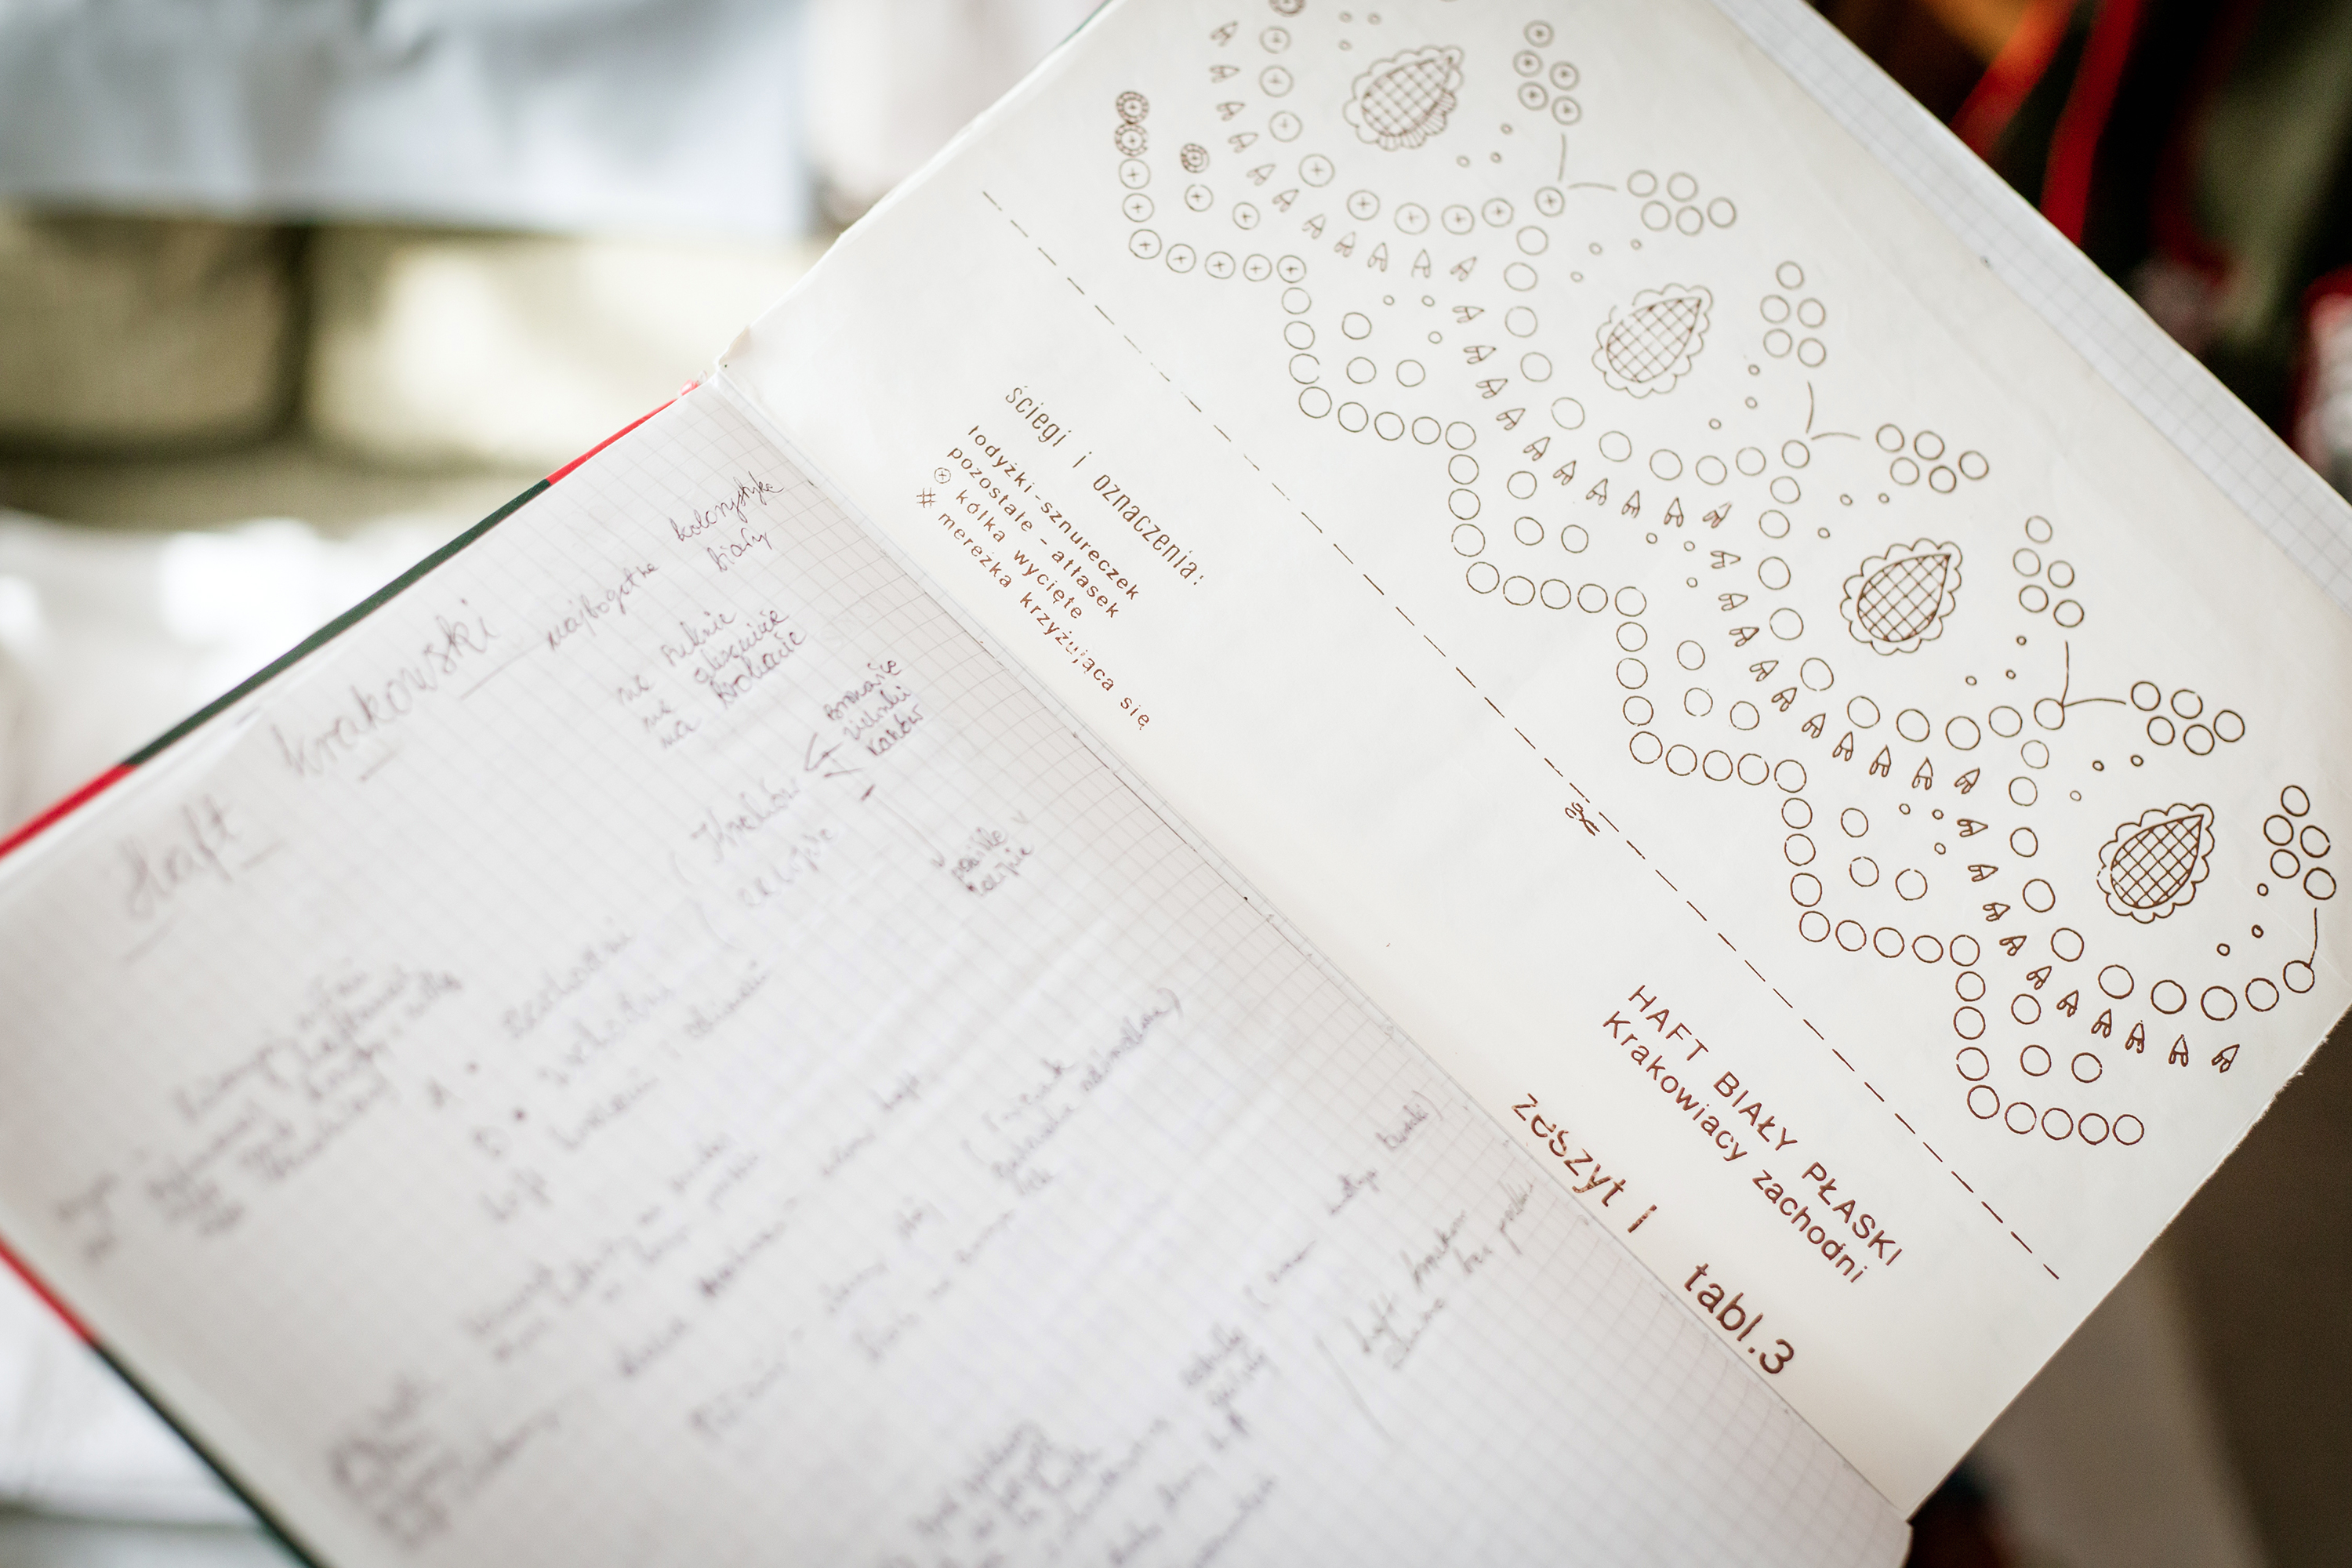 Notebook of valuable notes and patterns.